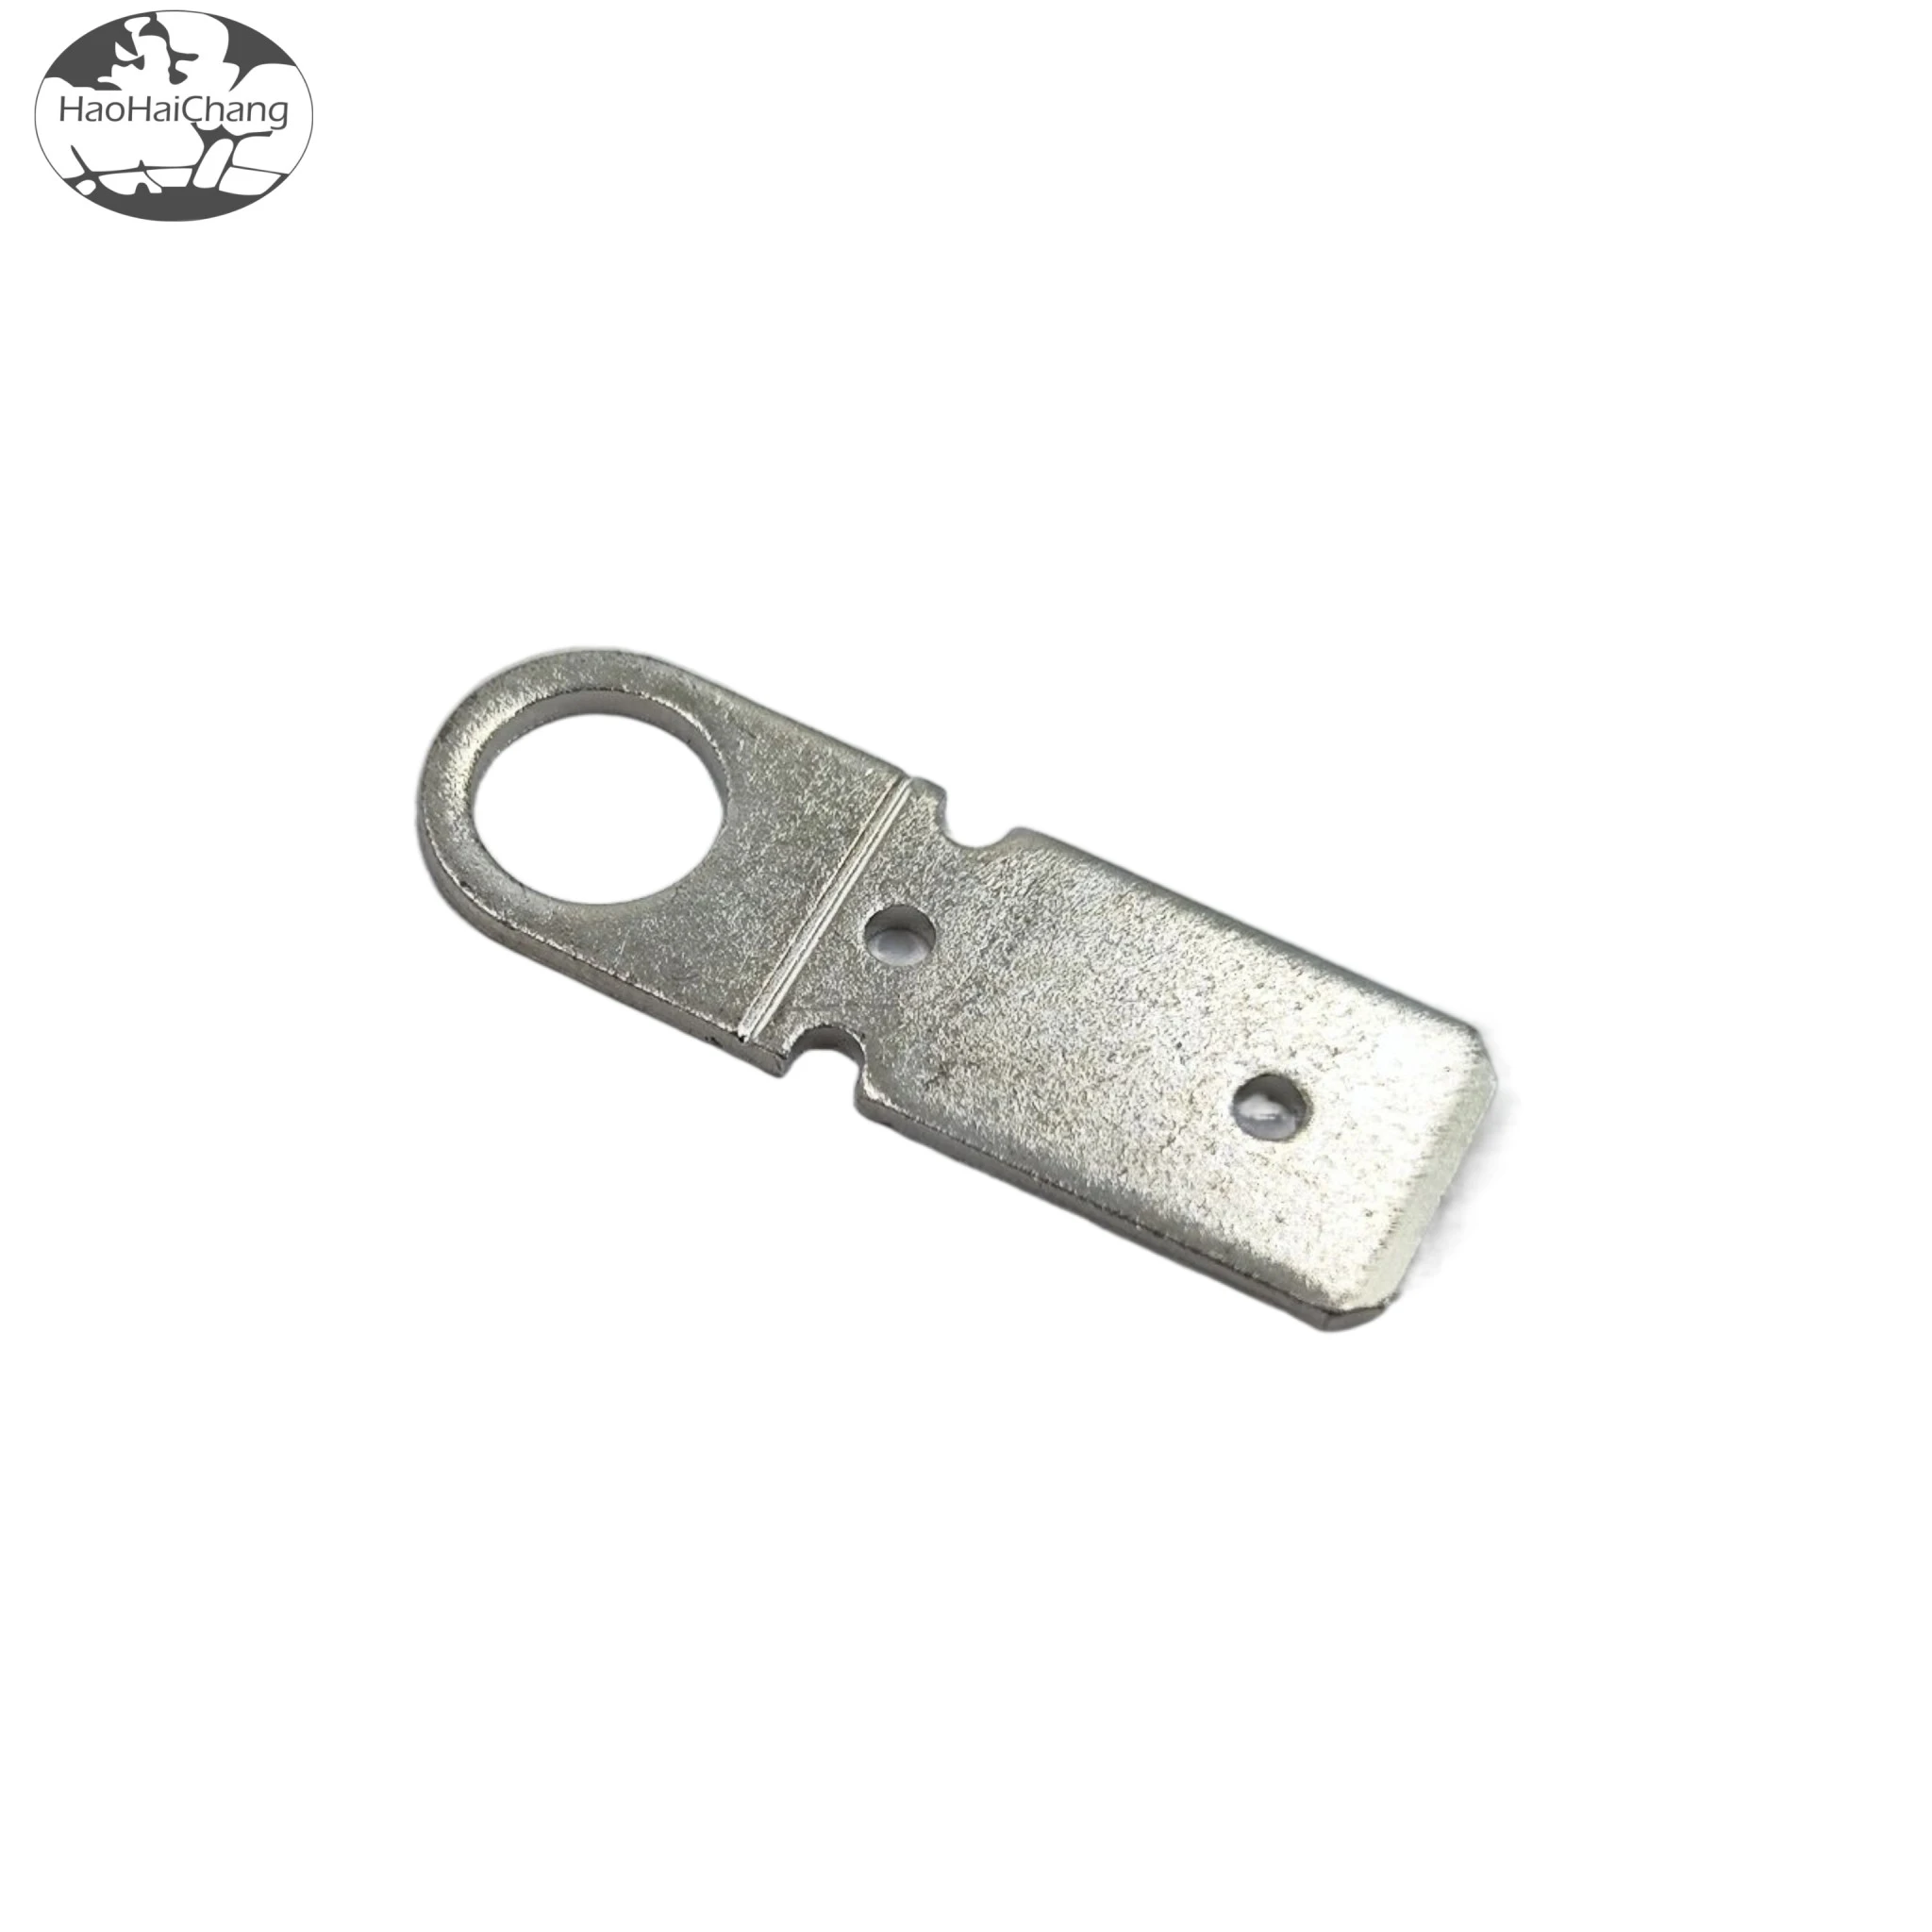 HHC-0121 Connector